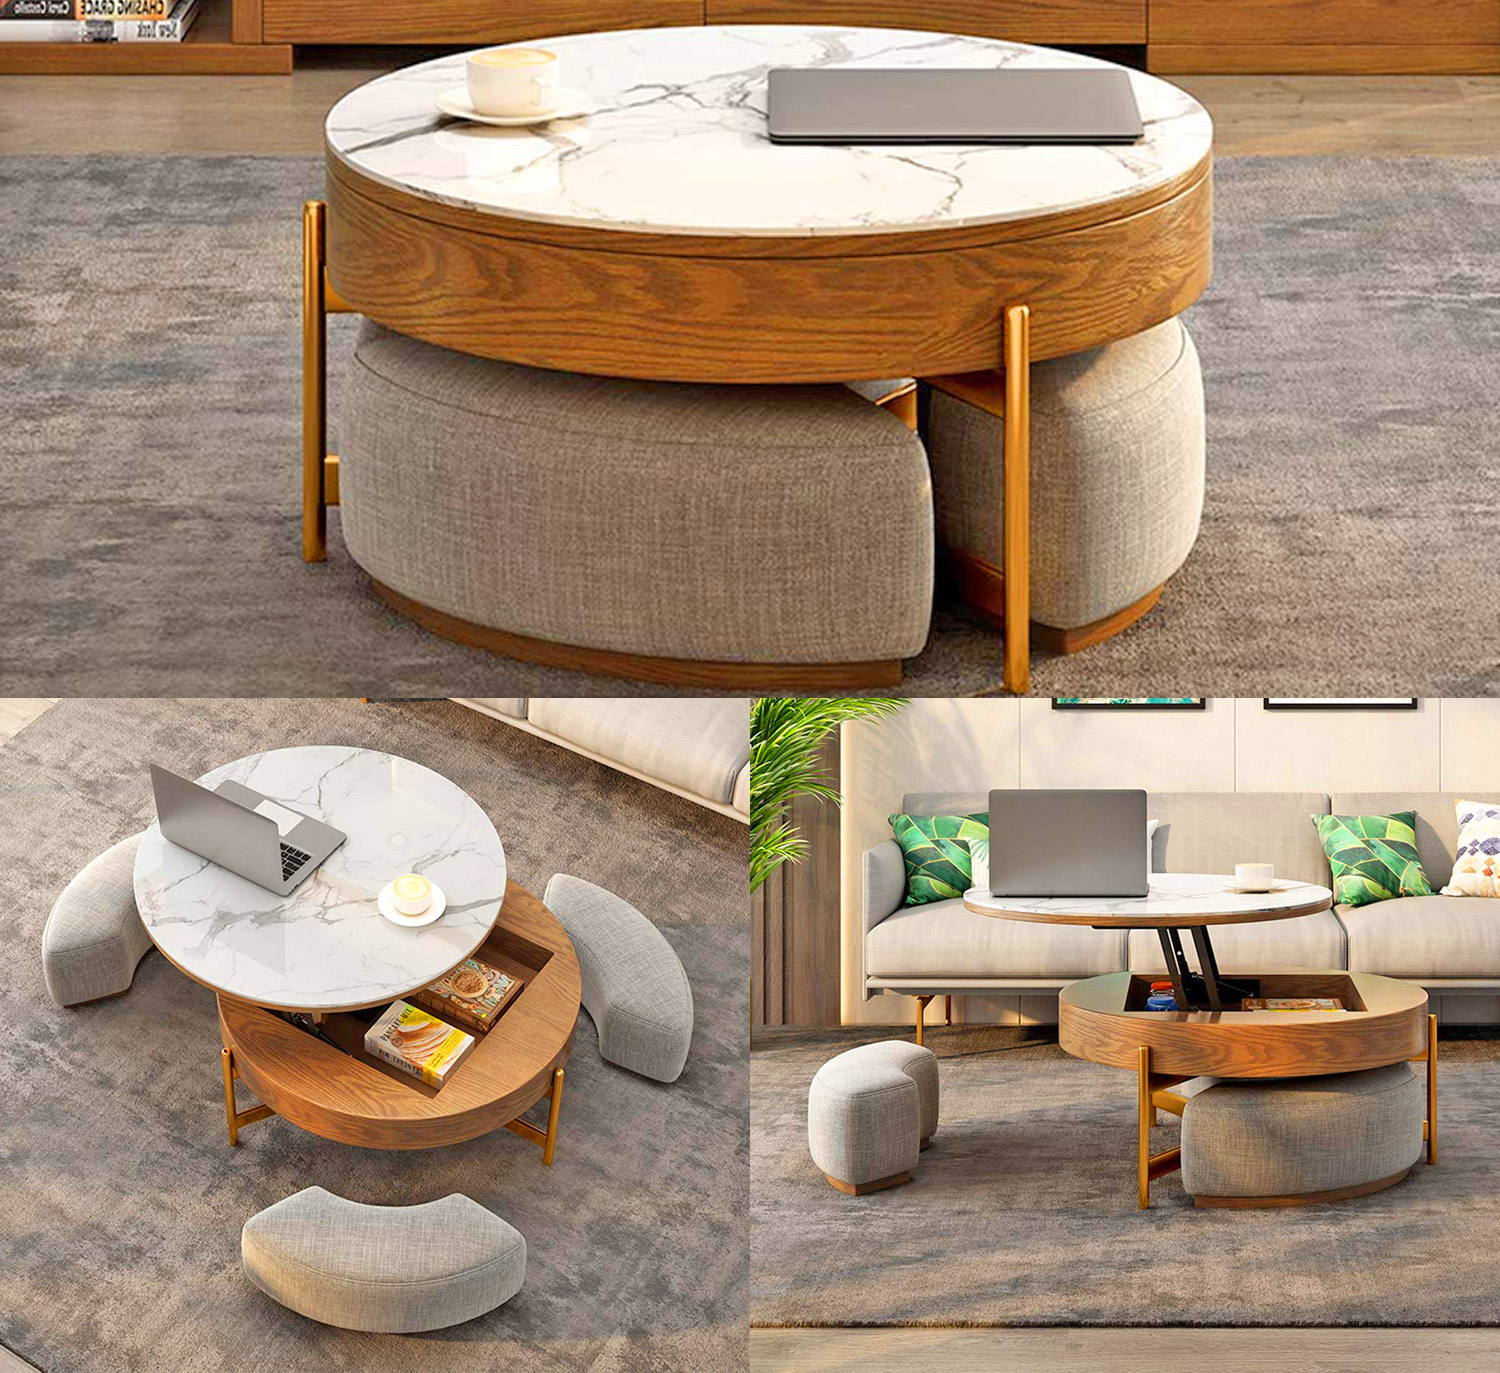 This Amazing Rising Coffee Table Has 3 Integrated Ottomans That Hide Underneath It